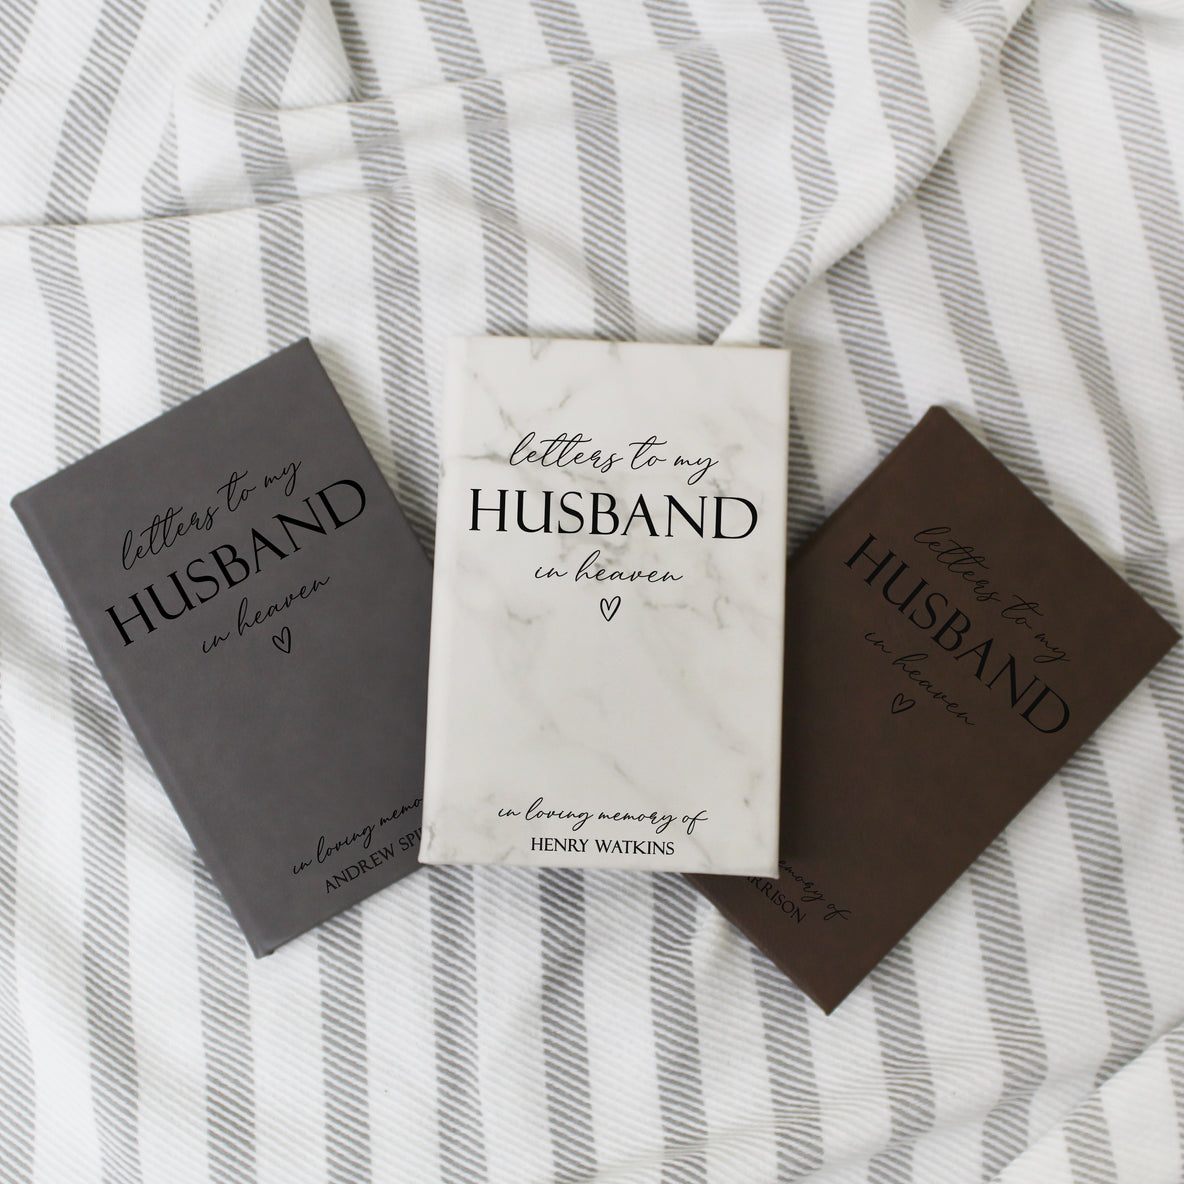 Personalized Husband Grief Journal